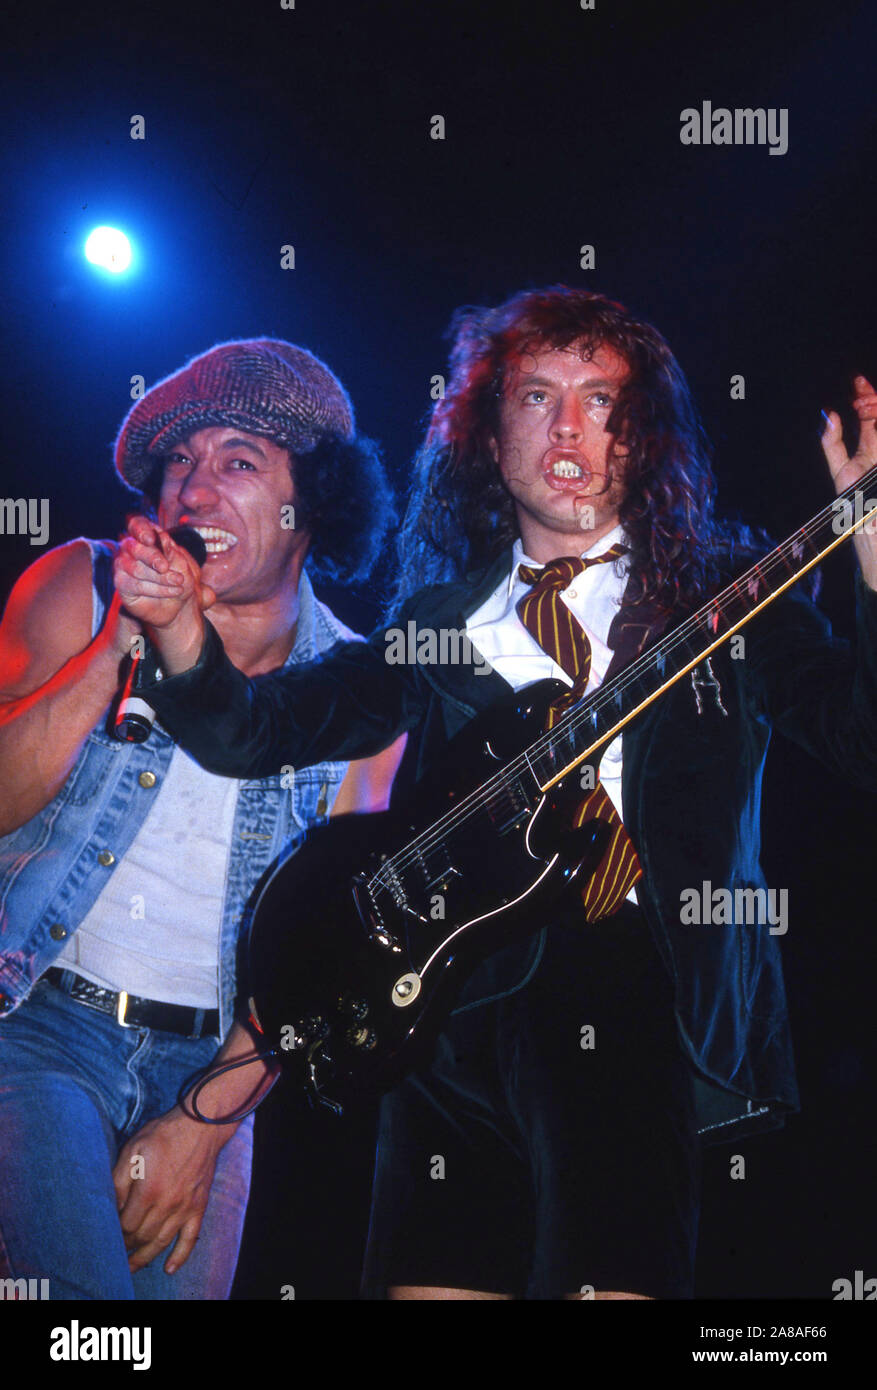 Australian heavy metal band AC/DC onn stage in London 1986: Brian Johnson  and Angus Young Stock Photo - Alamy